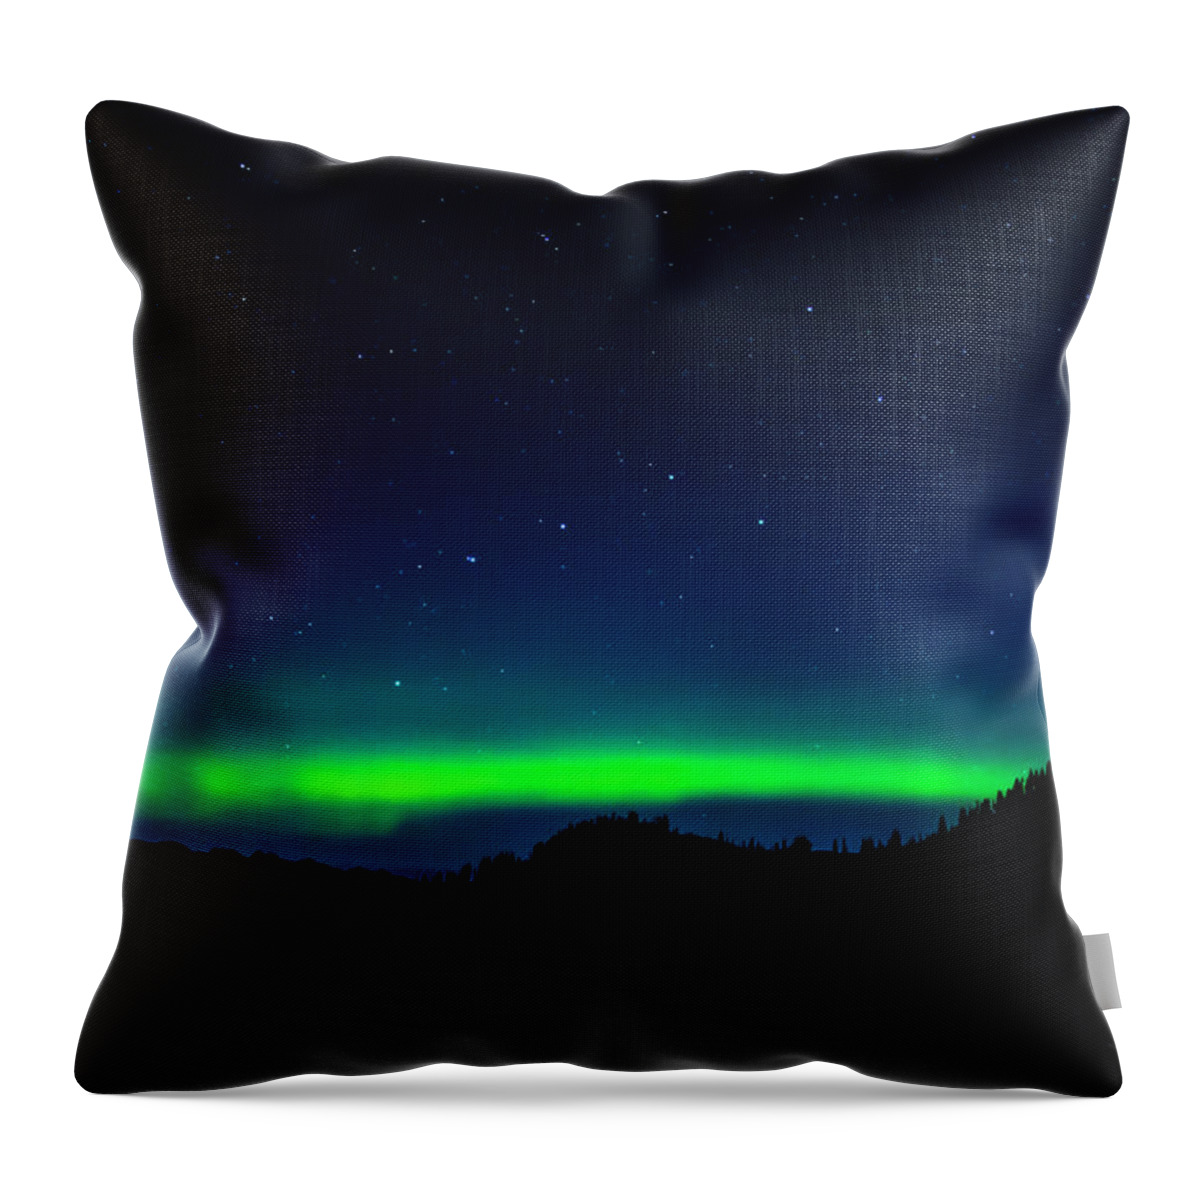 Northern Throw Pillow featuring the photograph Big Dipper Northern Lights by Pelo Blanco Photo